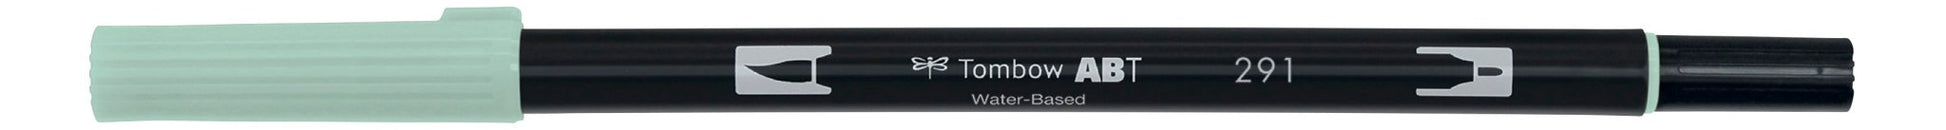 Tombow ABT dual brush pen - single colours - Tombow - Alice blue ABT-291 - millenotes